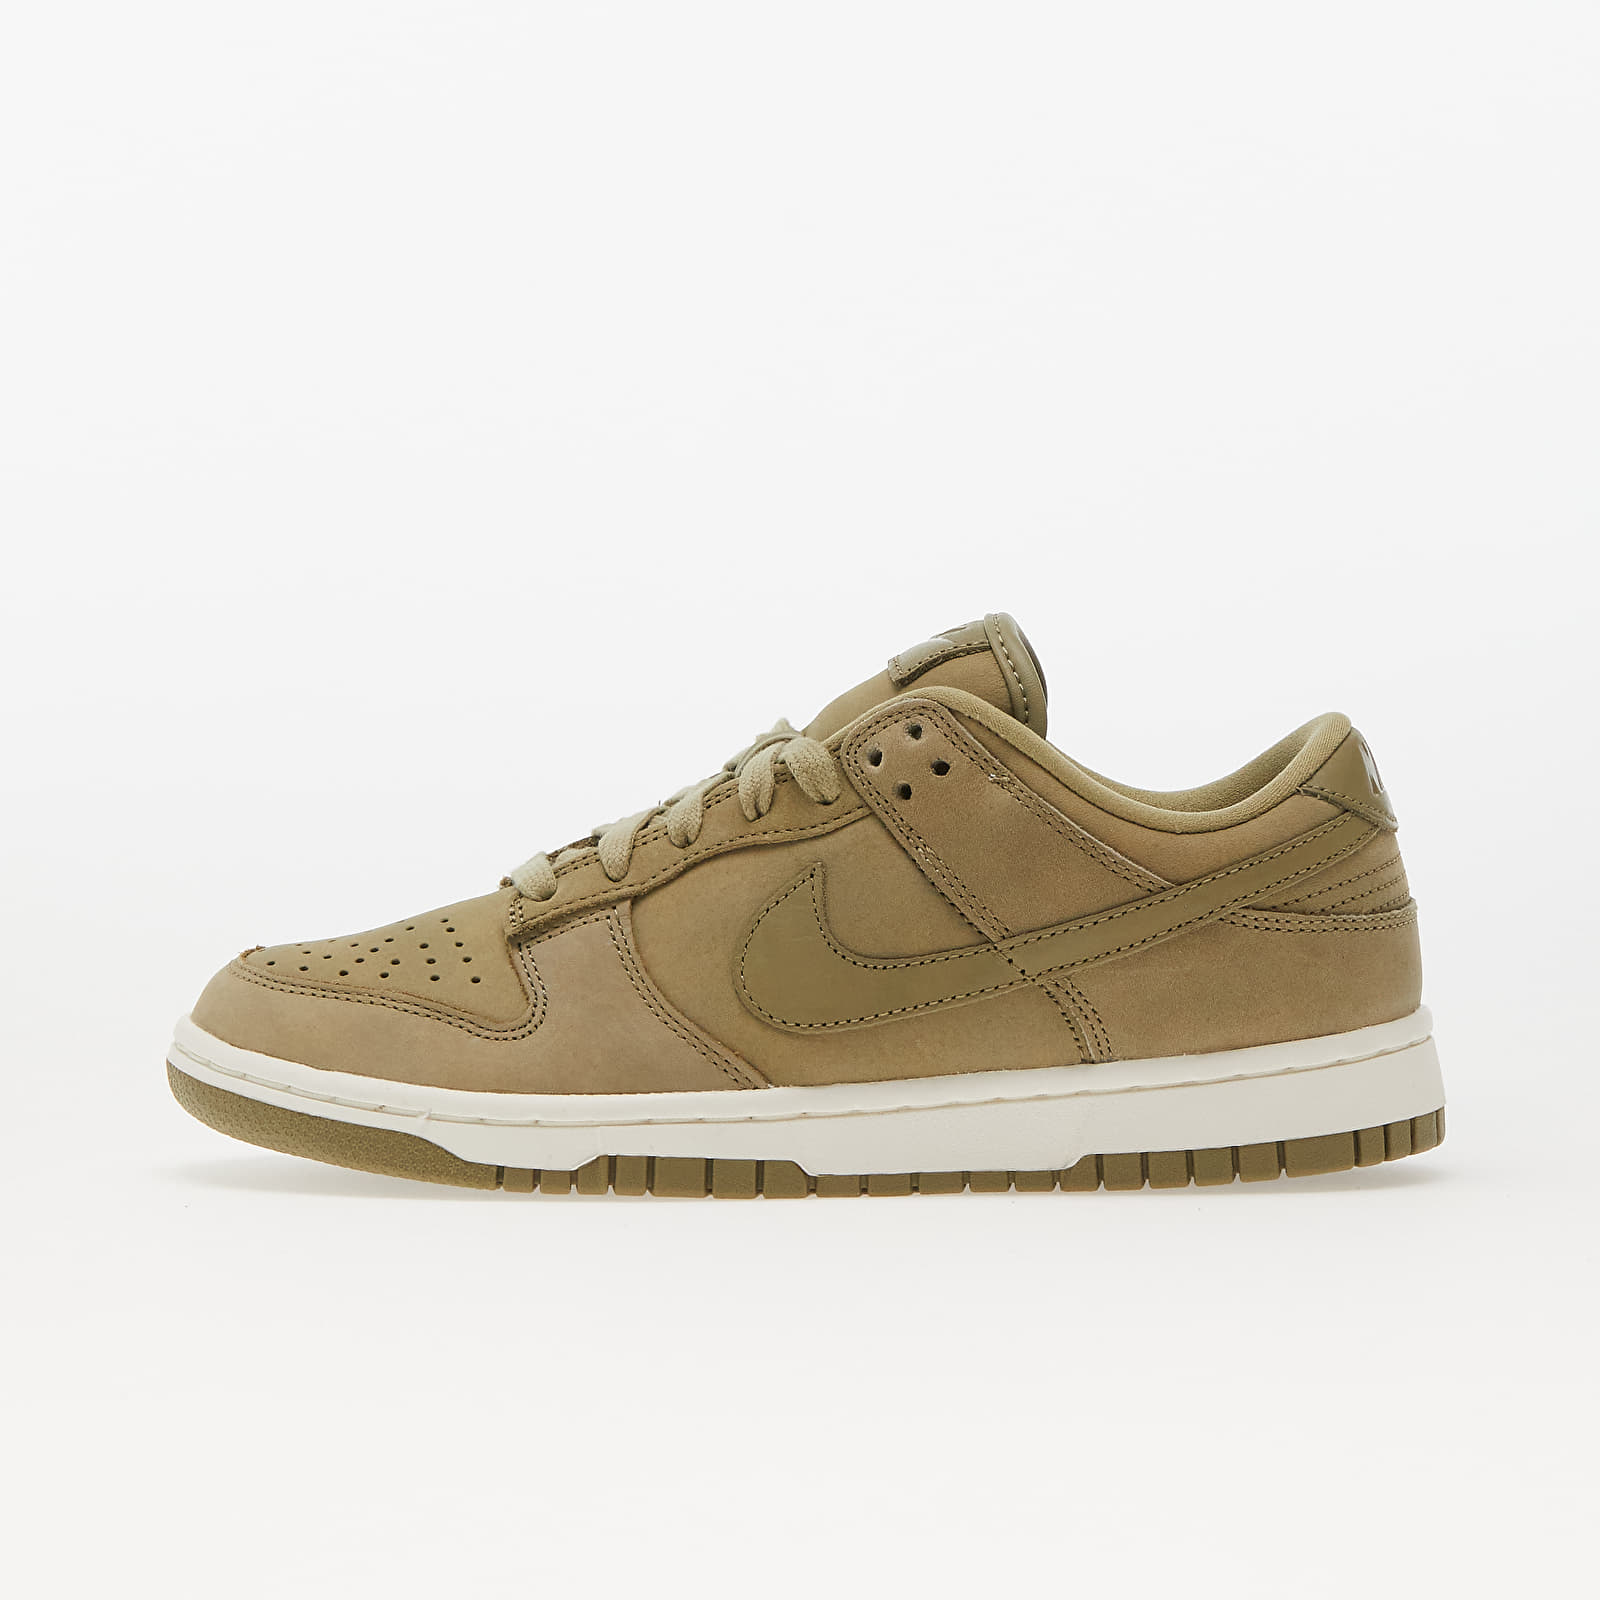 Women's sneakers and shoes Nike W Dunk Low Premium Mf Neutral Olive/ Neutral Olive-Sail